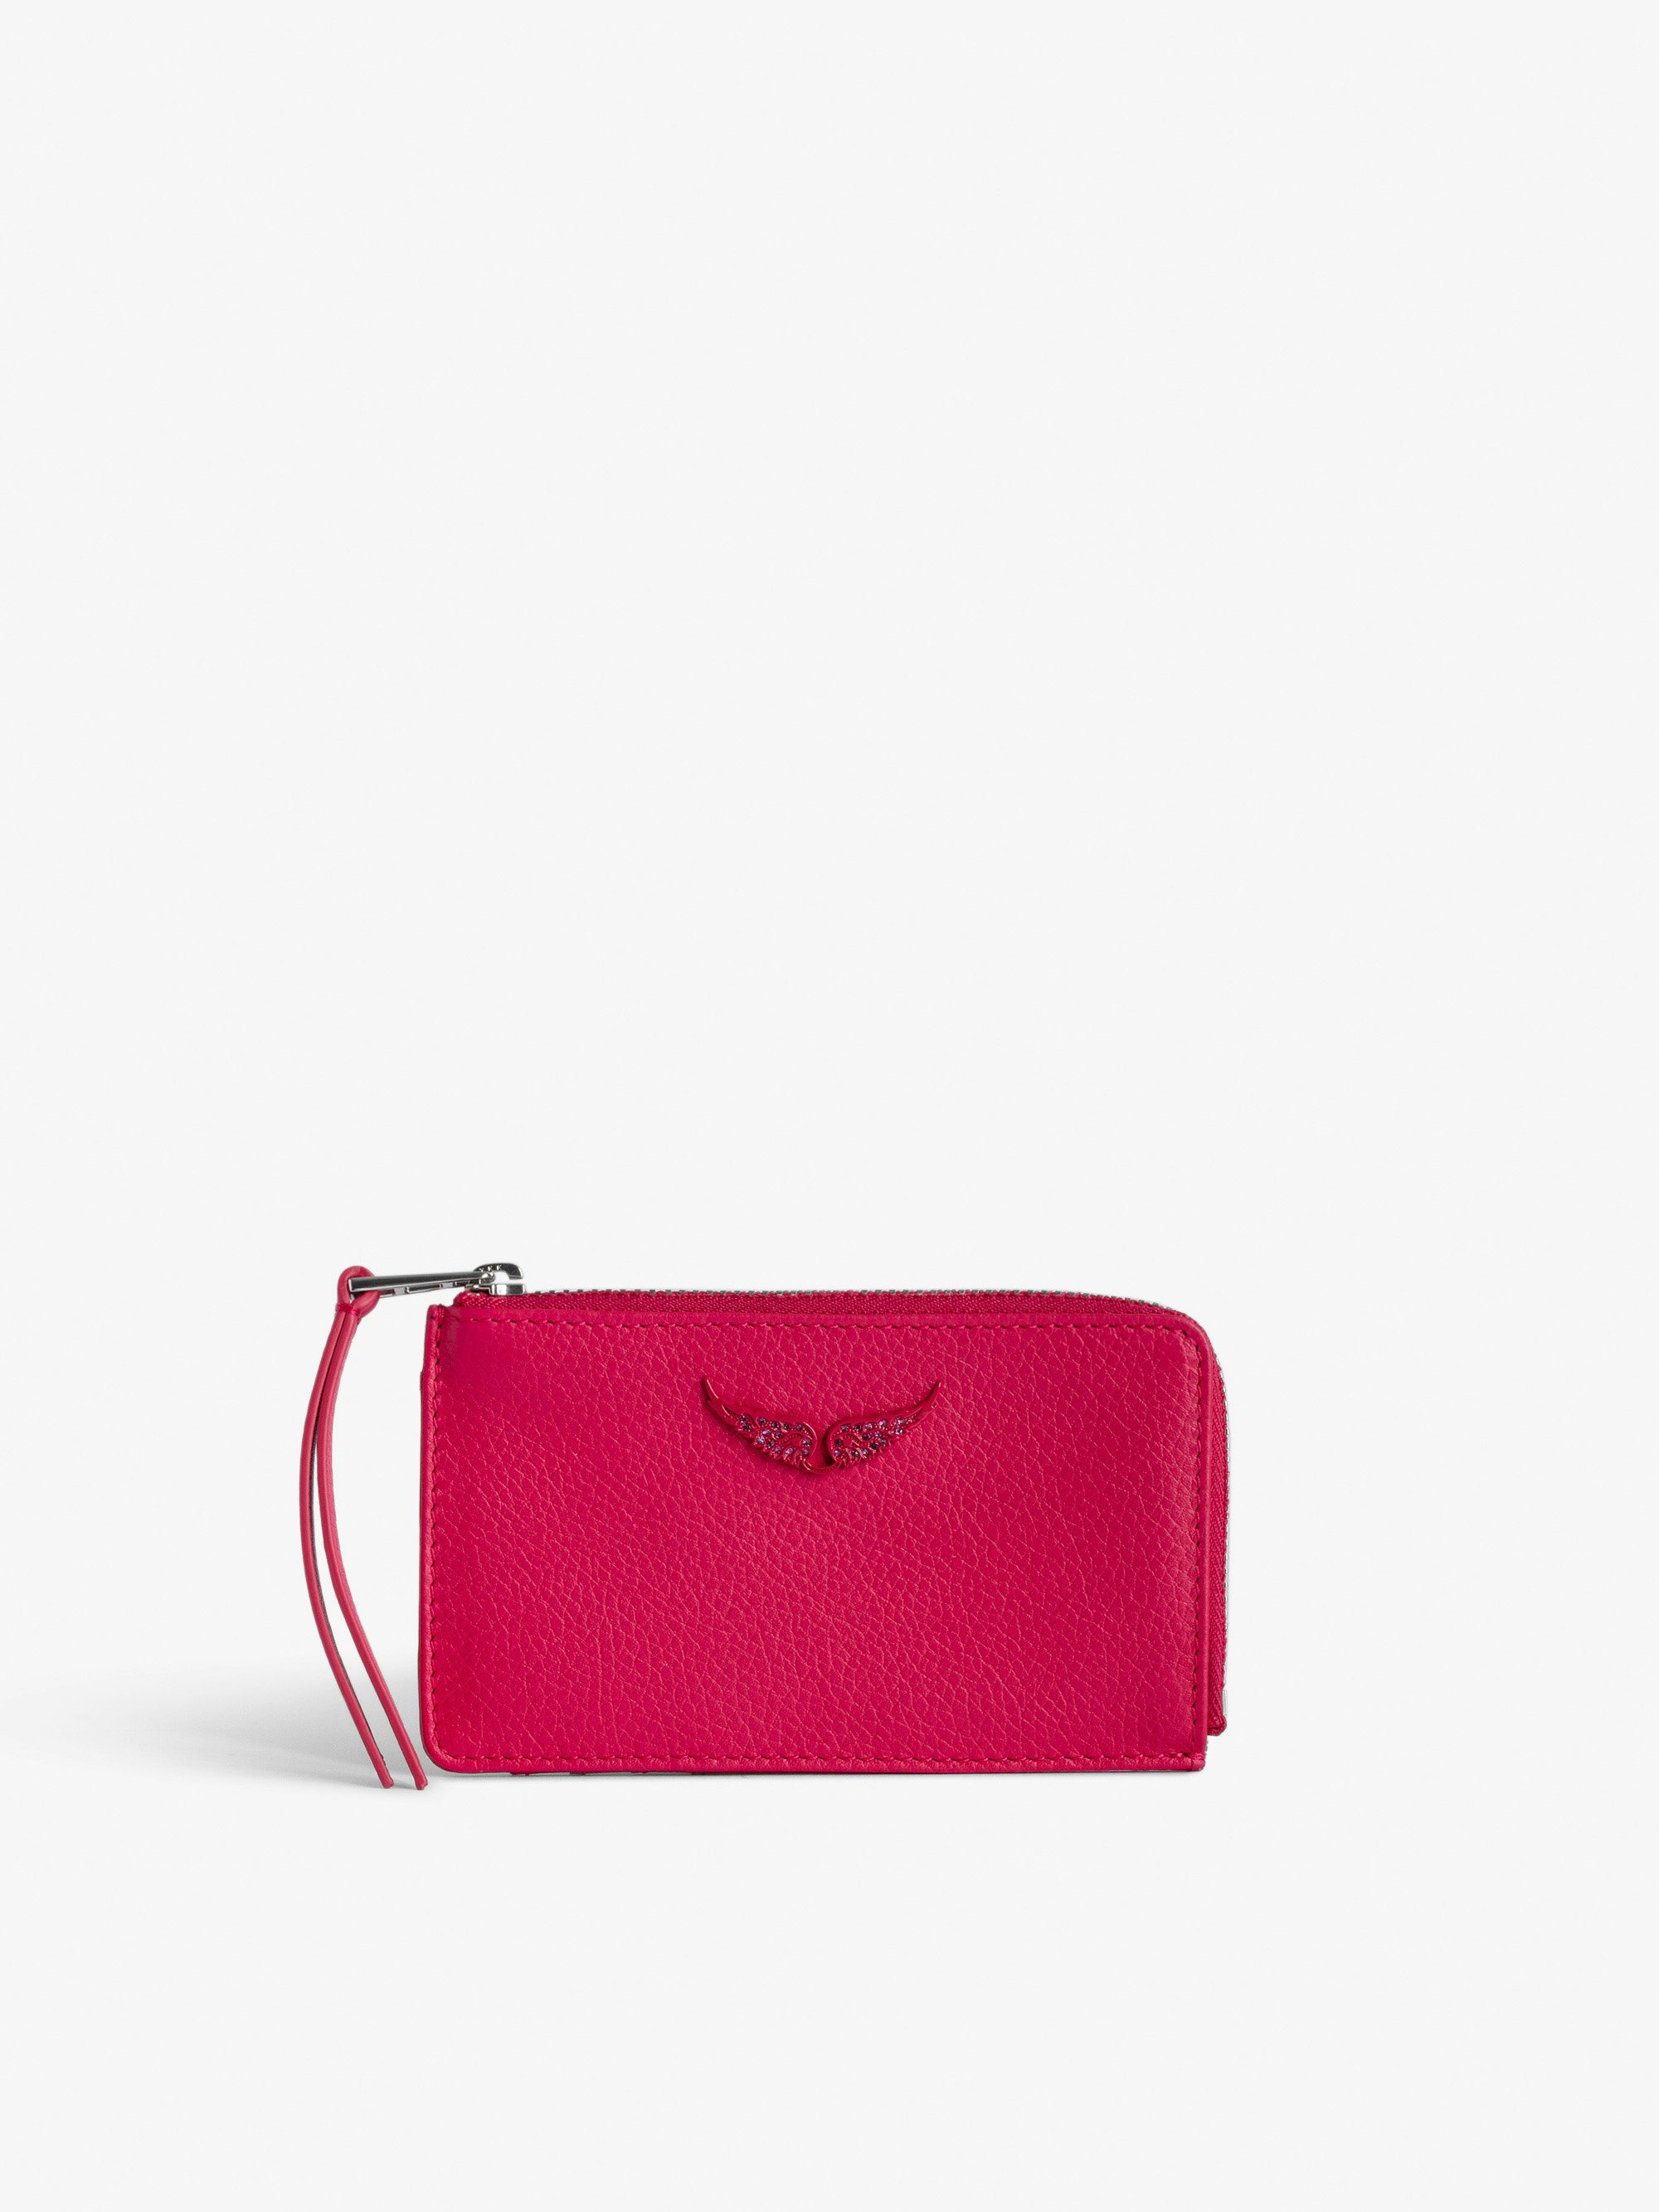 ZV Card Card Holder - Women’s pink grained leather card holder with wings charm.